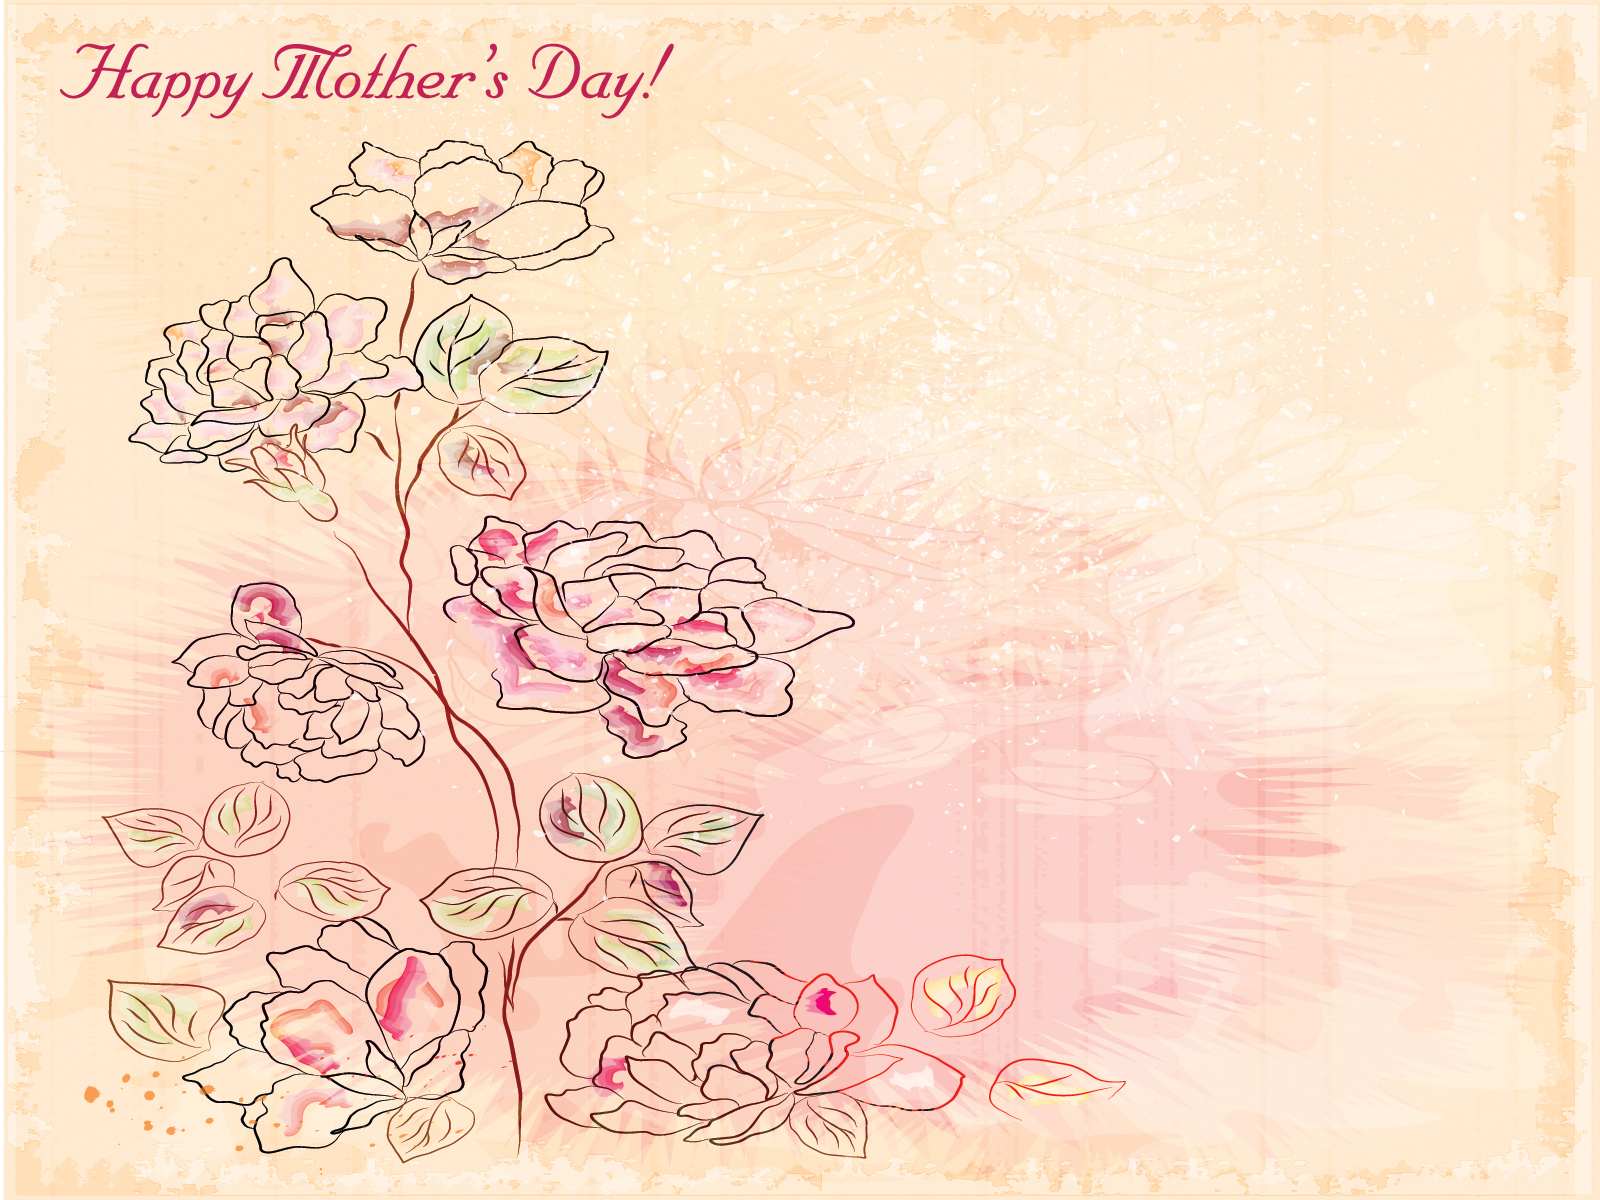 Happy Mothers Day 2013 Powerpoint Templates - Brown, Fuchsia / Magenta,  Holidays, Orange - Free PPT Backgrounds and Templates